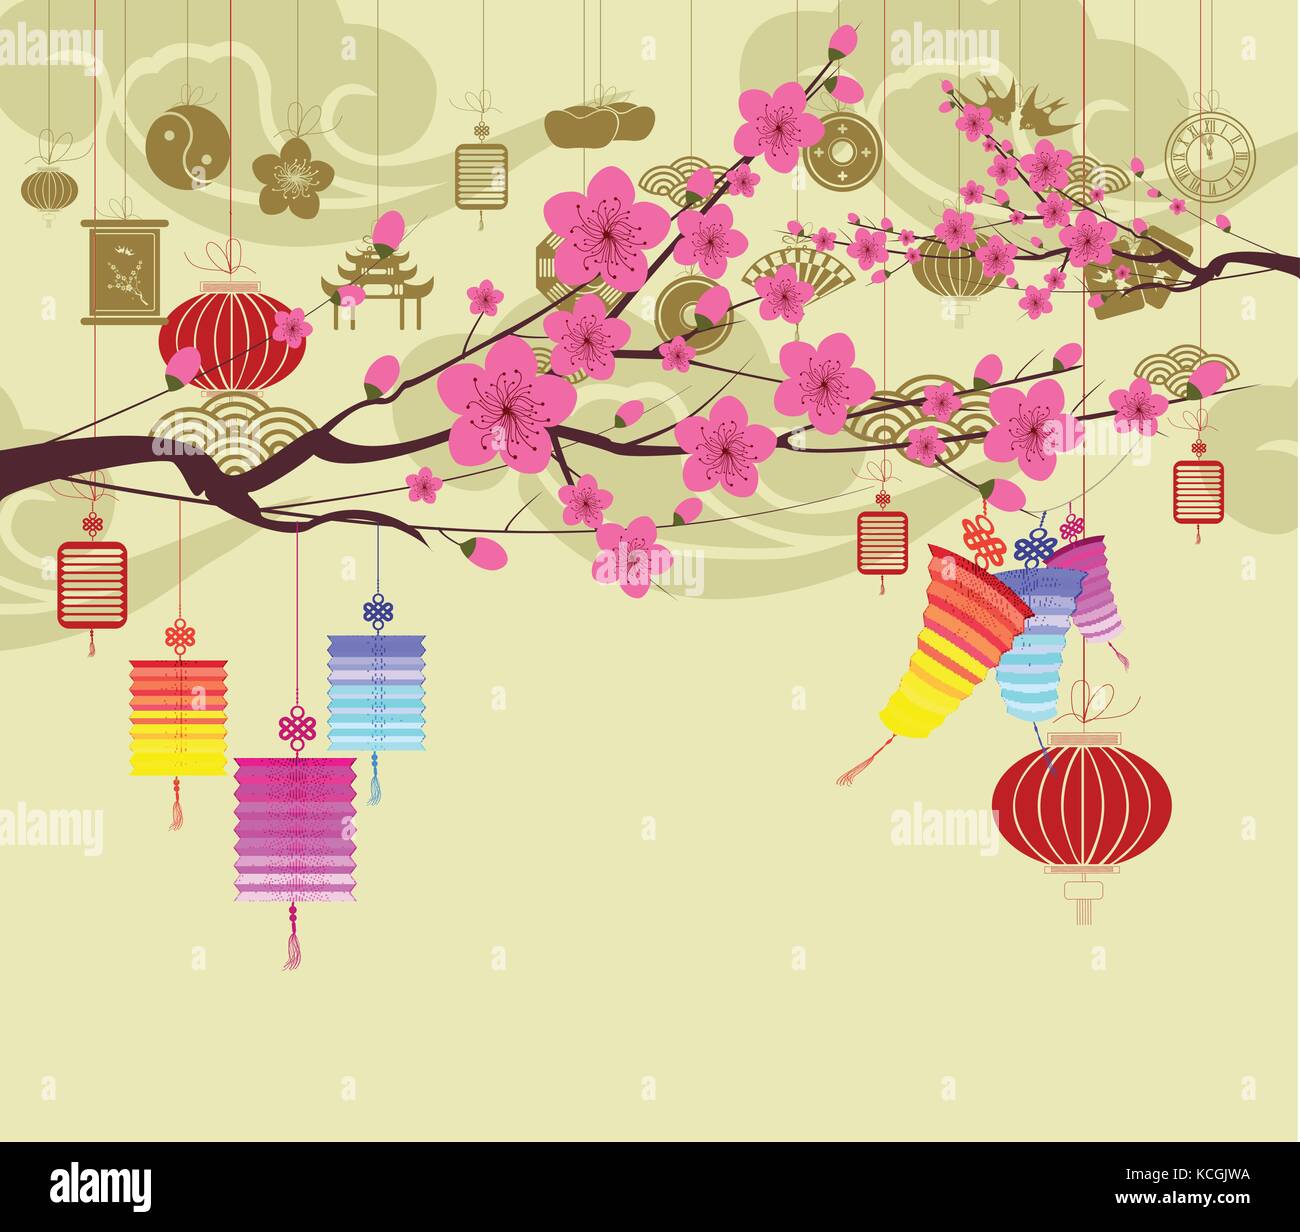 Oriental Happy Chinese New Year 2018 blossom. Chinese baclground Stock Vector